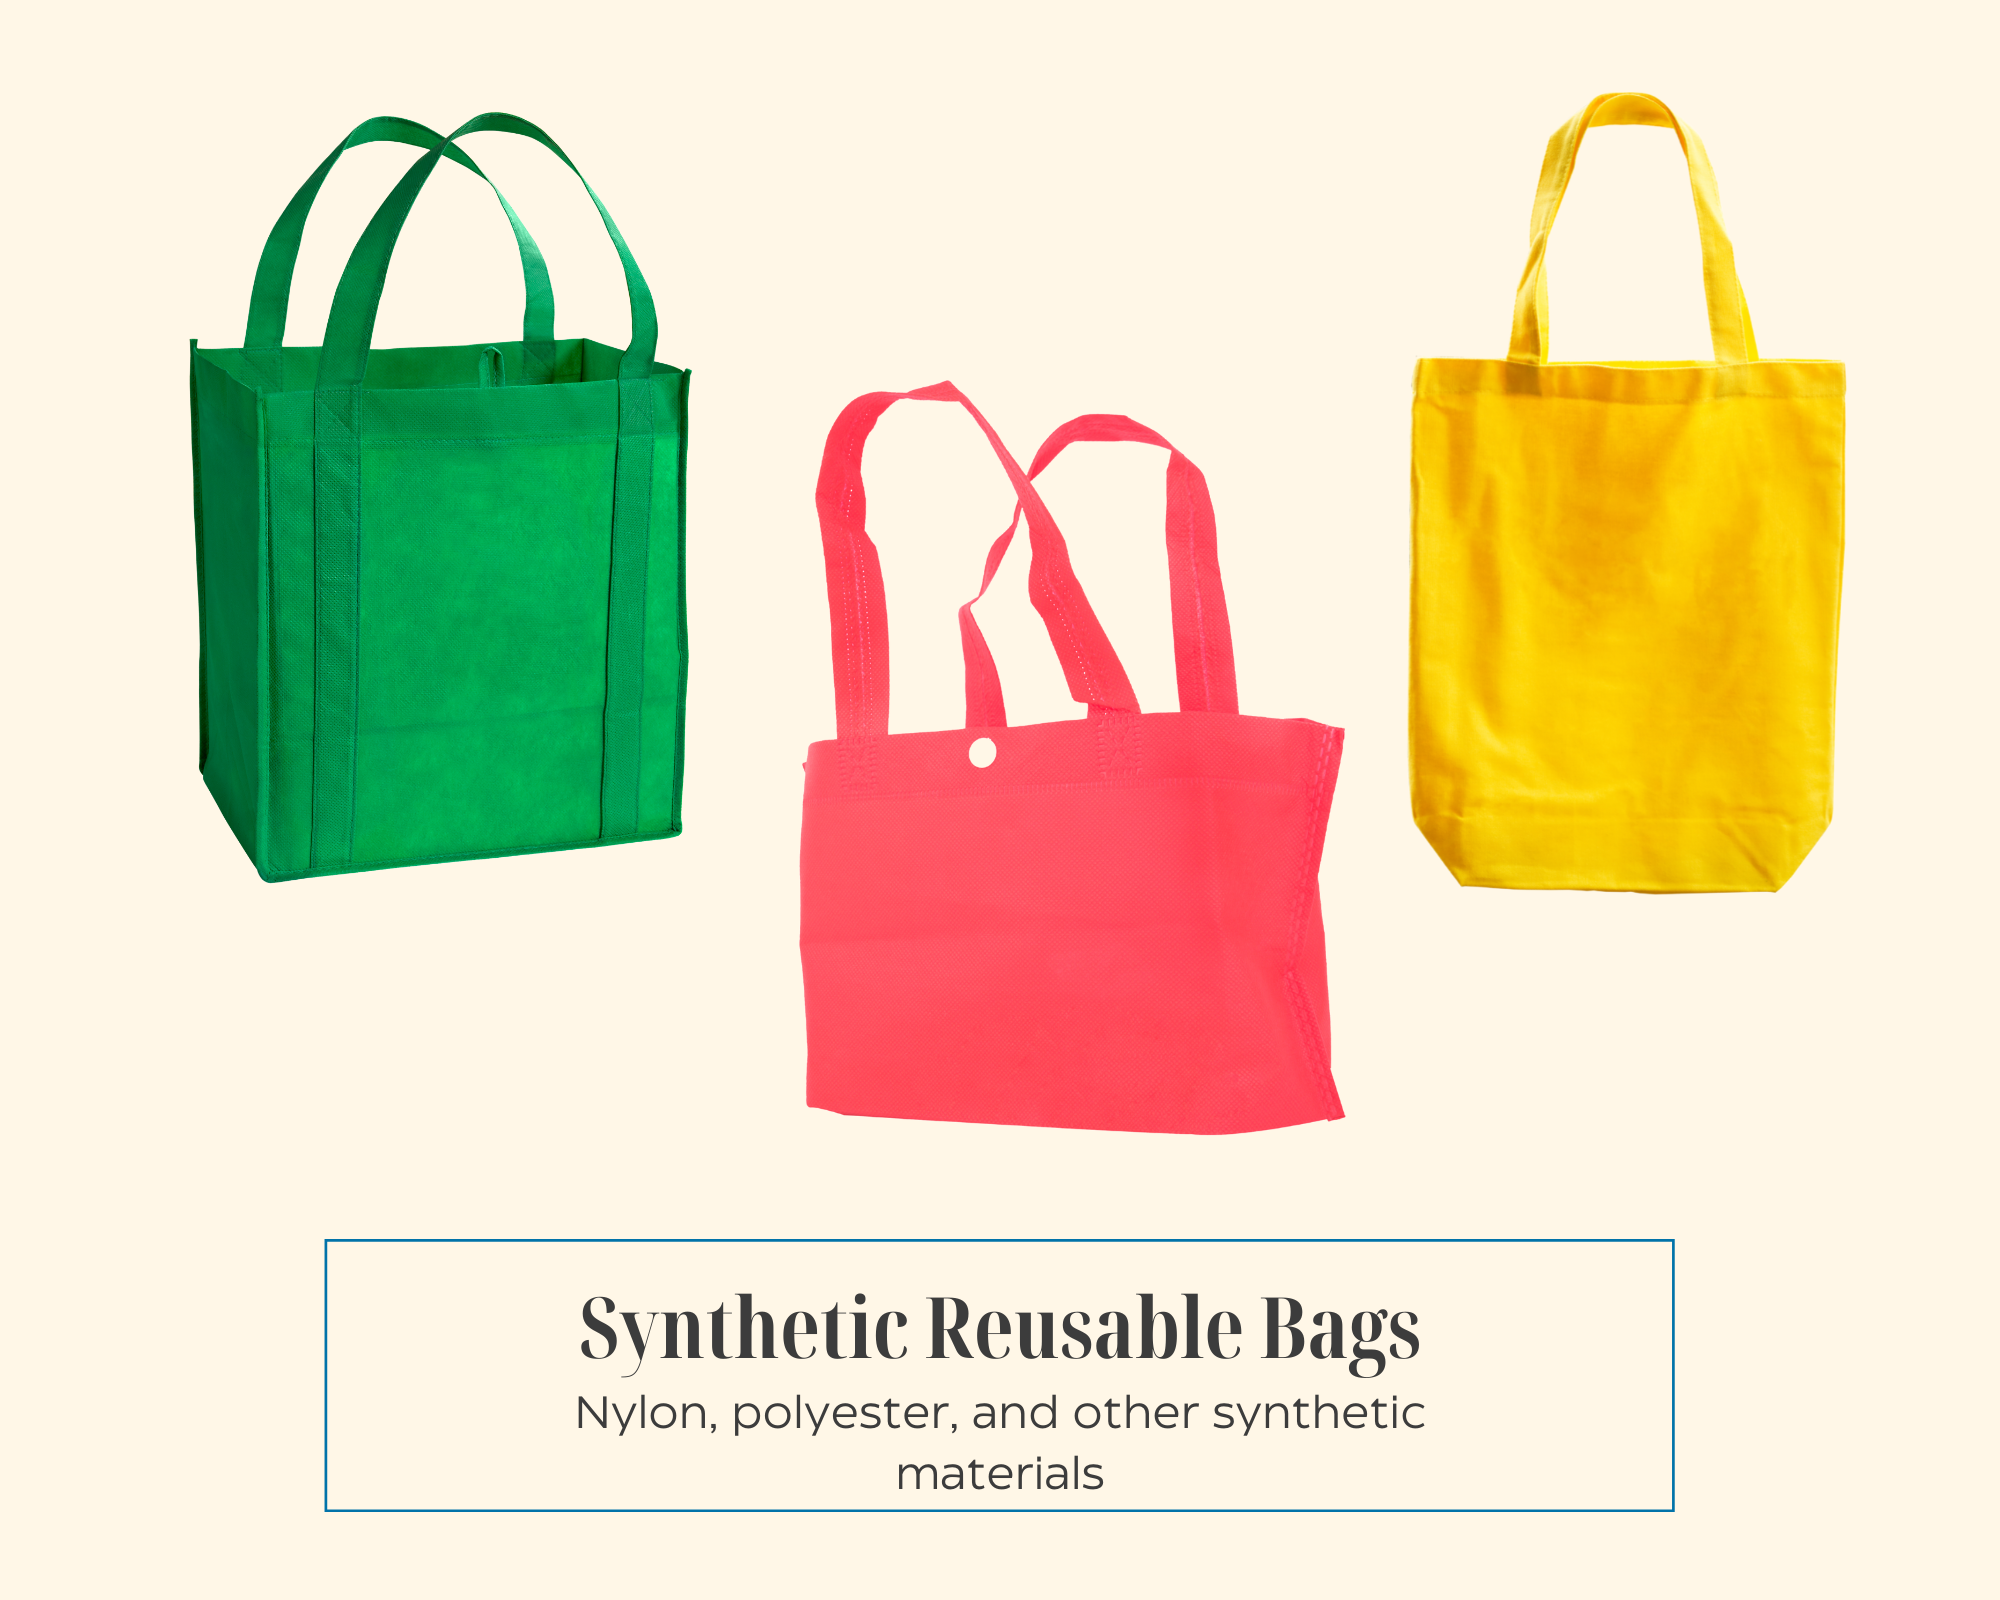 https://plastic.education/wp-content/uploads/2022/12/Synthetic-Reusable-Bags-1.png